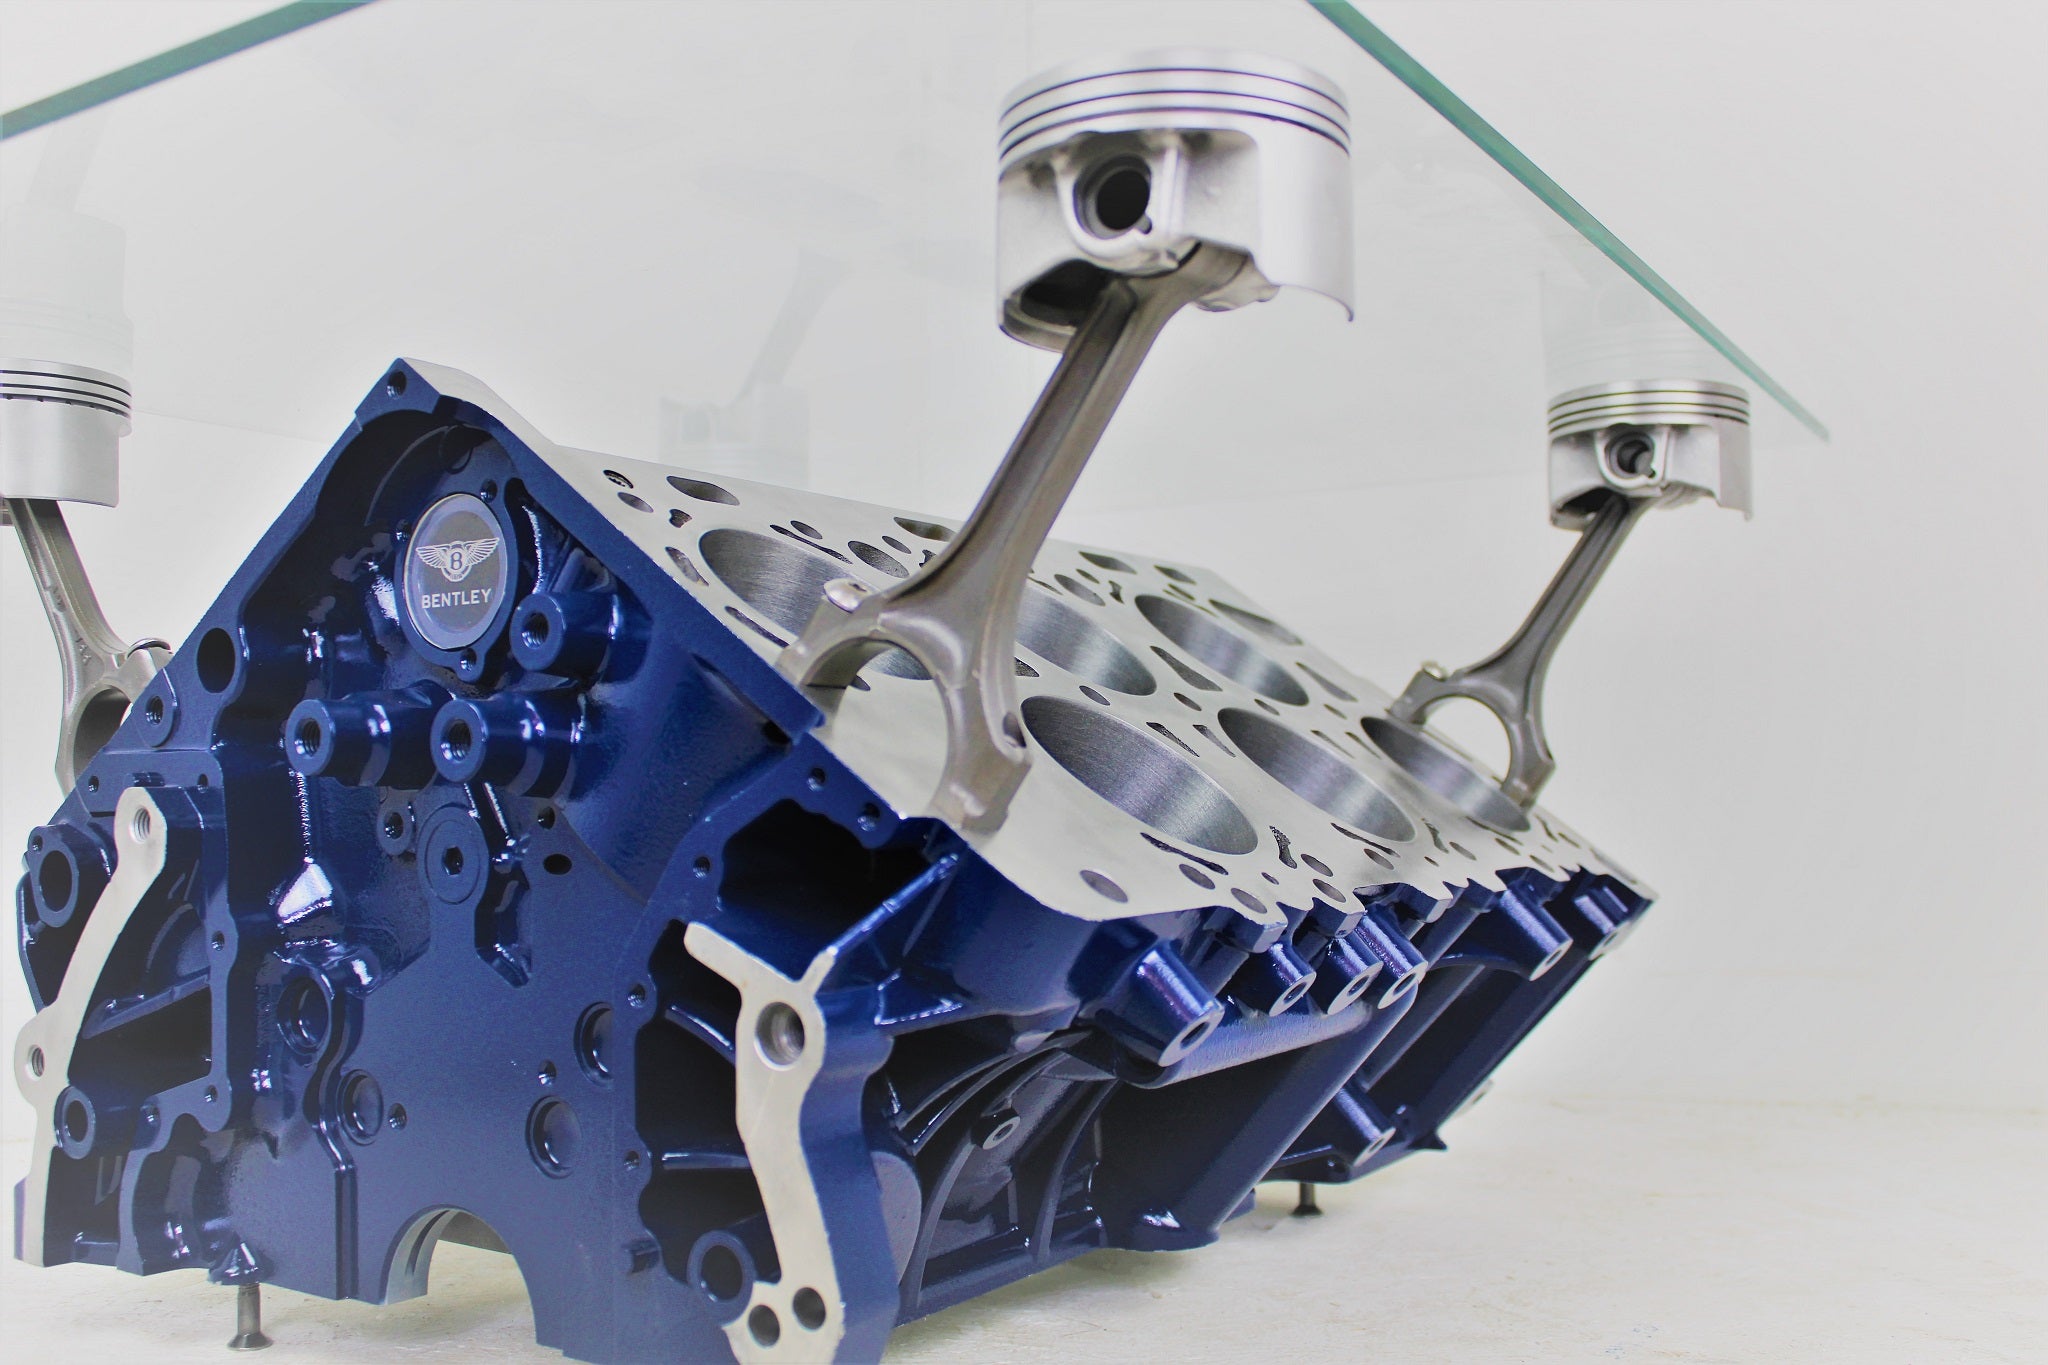 Bentley engine block coffee table with a rectangular glass top held up by car engine pistons. The table is painted dark blue, with the Bentley logo displayed on the front.